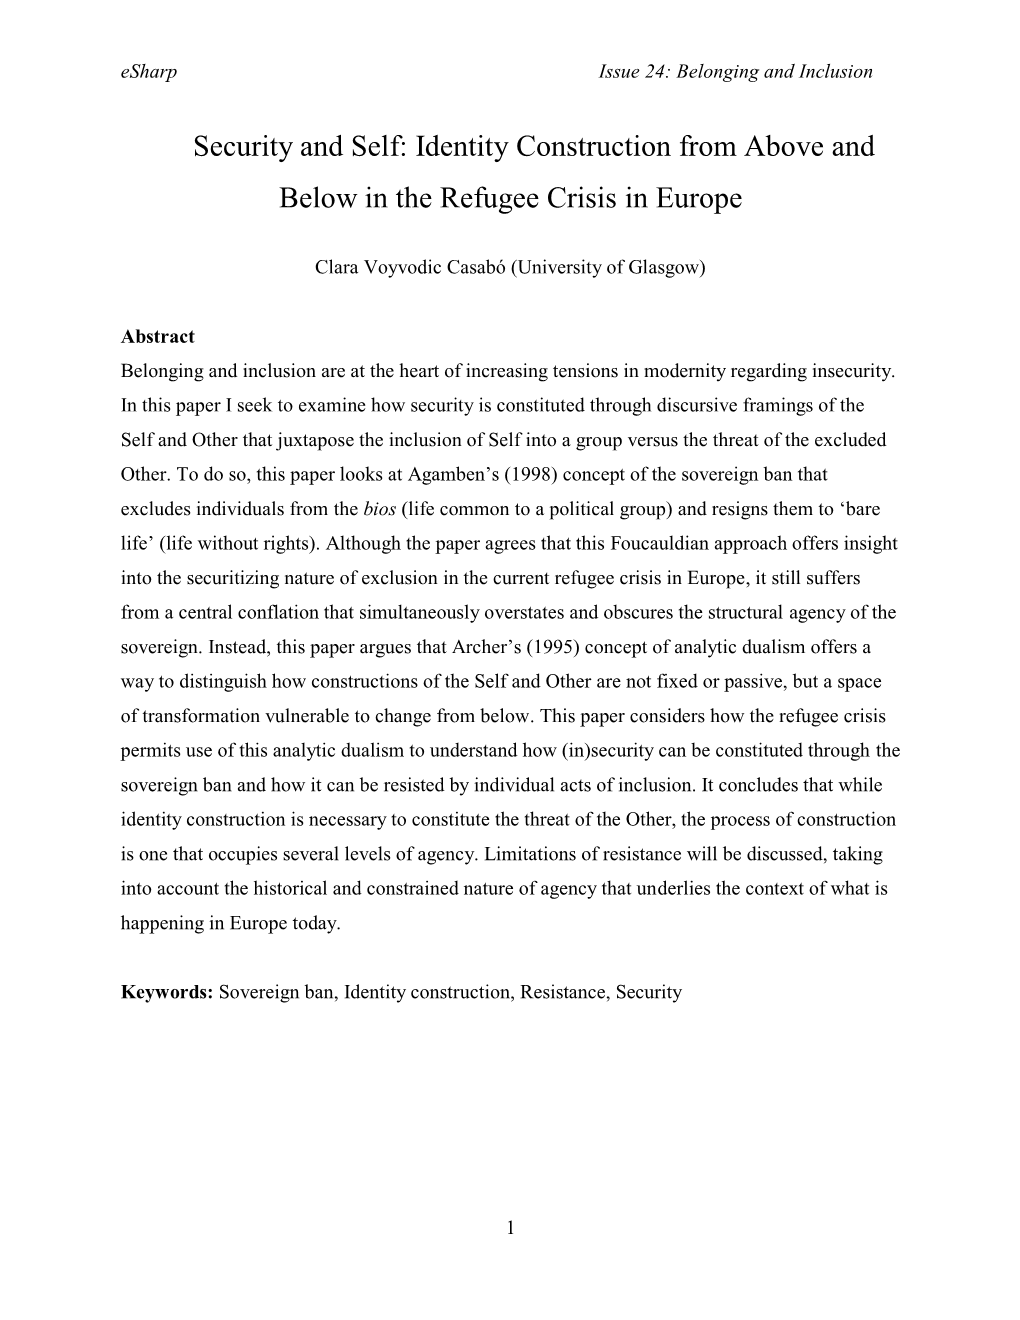 Identity Construction from Above and Below in the Refugee Crisis in Europe